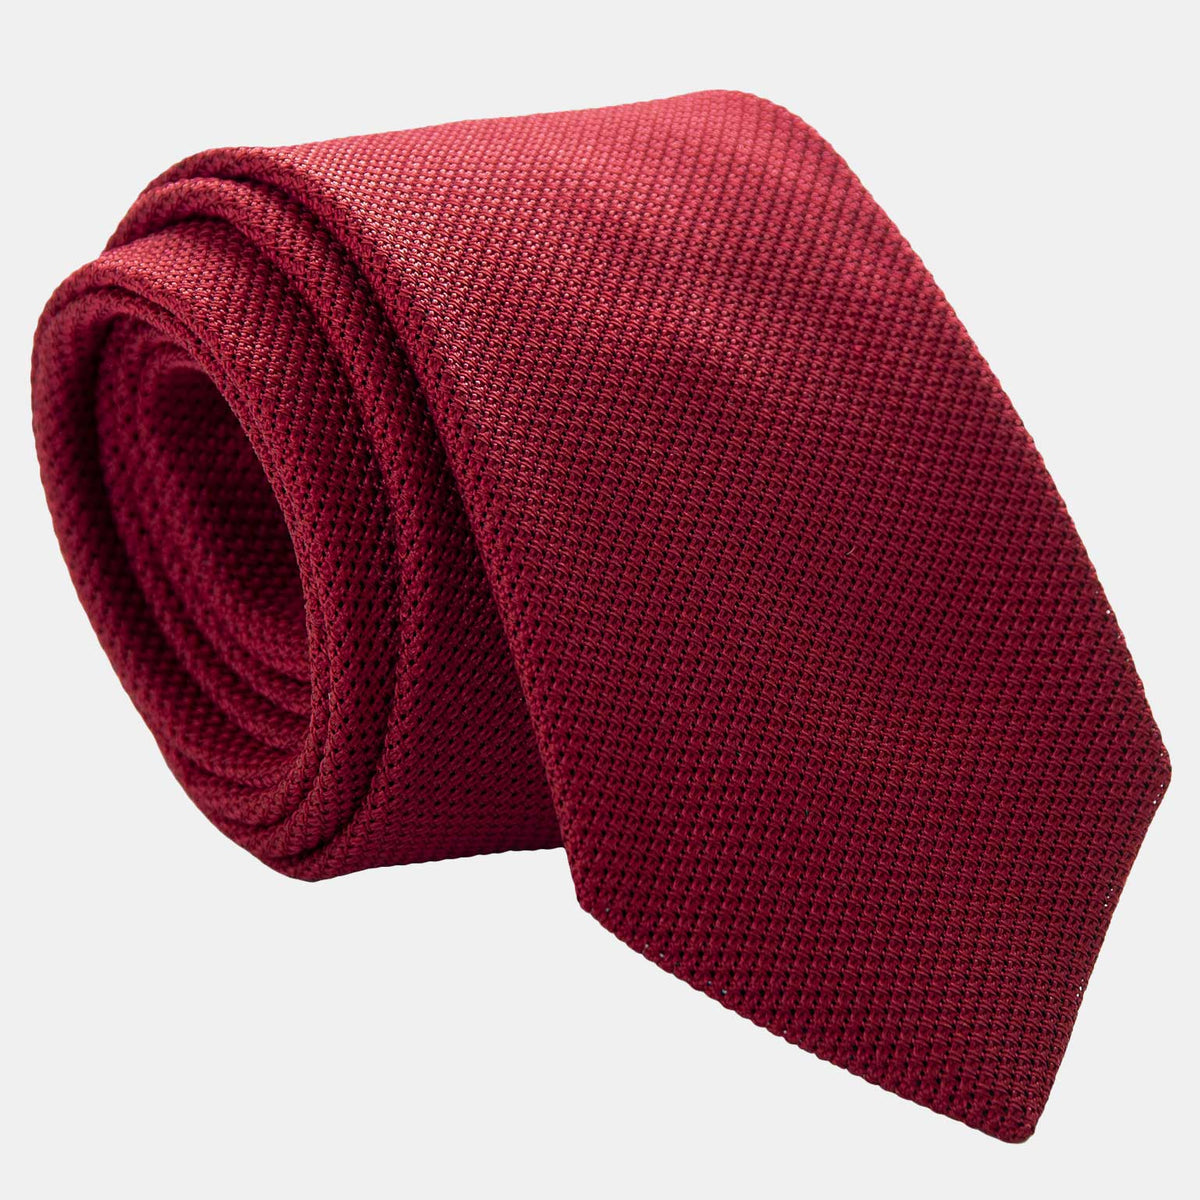 Extra Long Grenadine Tie - Solid Red - Made in Italy